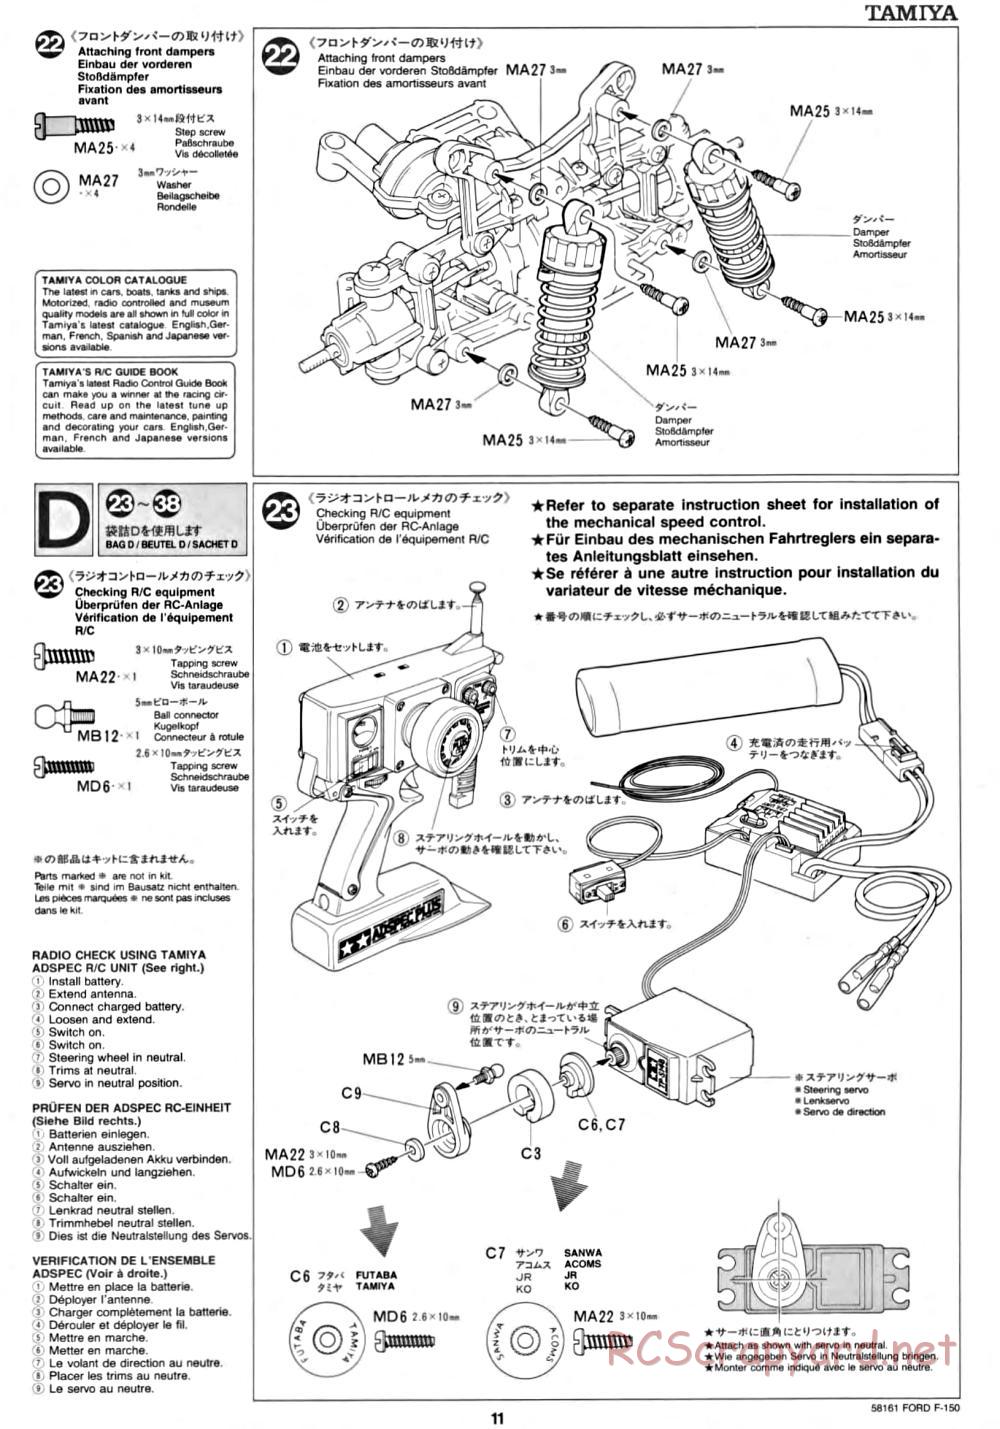 Tamiya - Ford F-150 Truck Chassis - Manual - Page 11